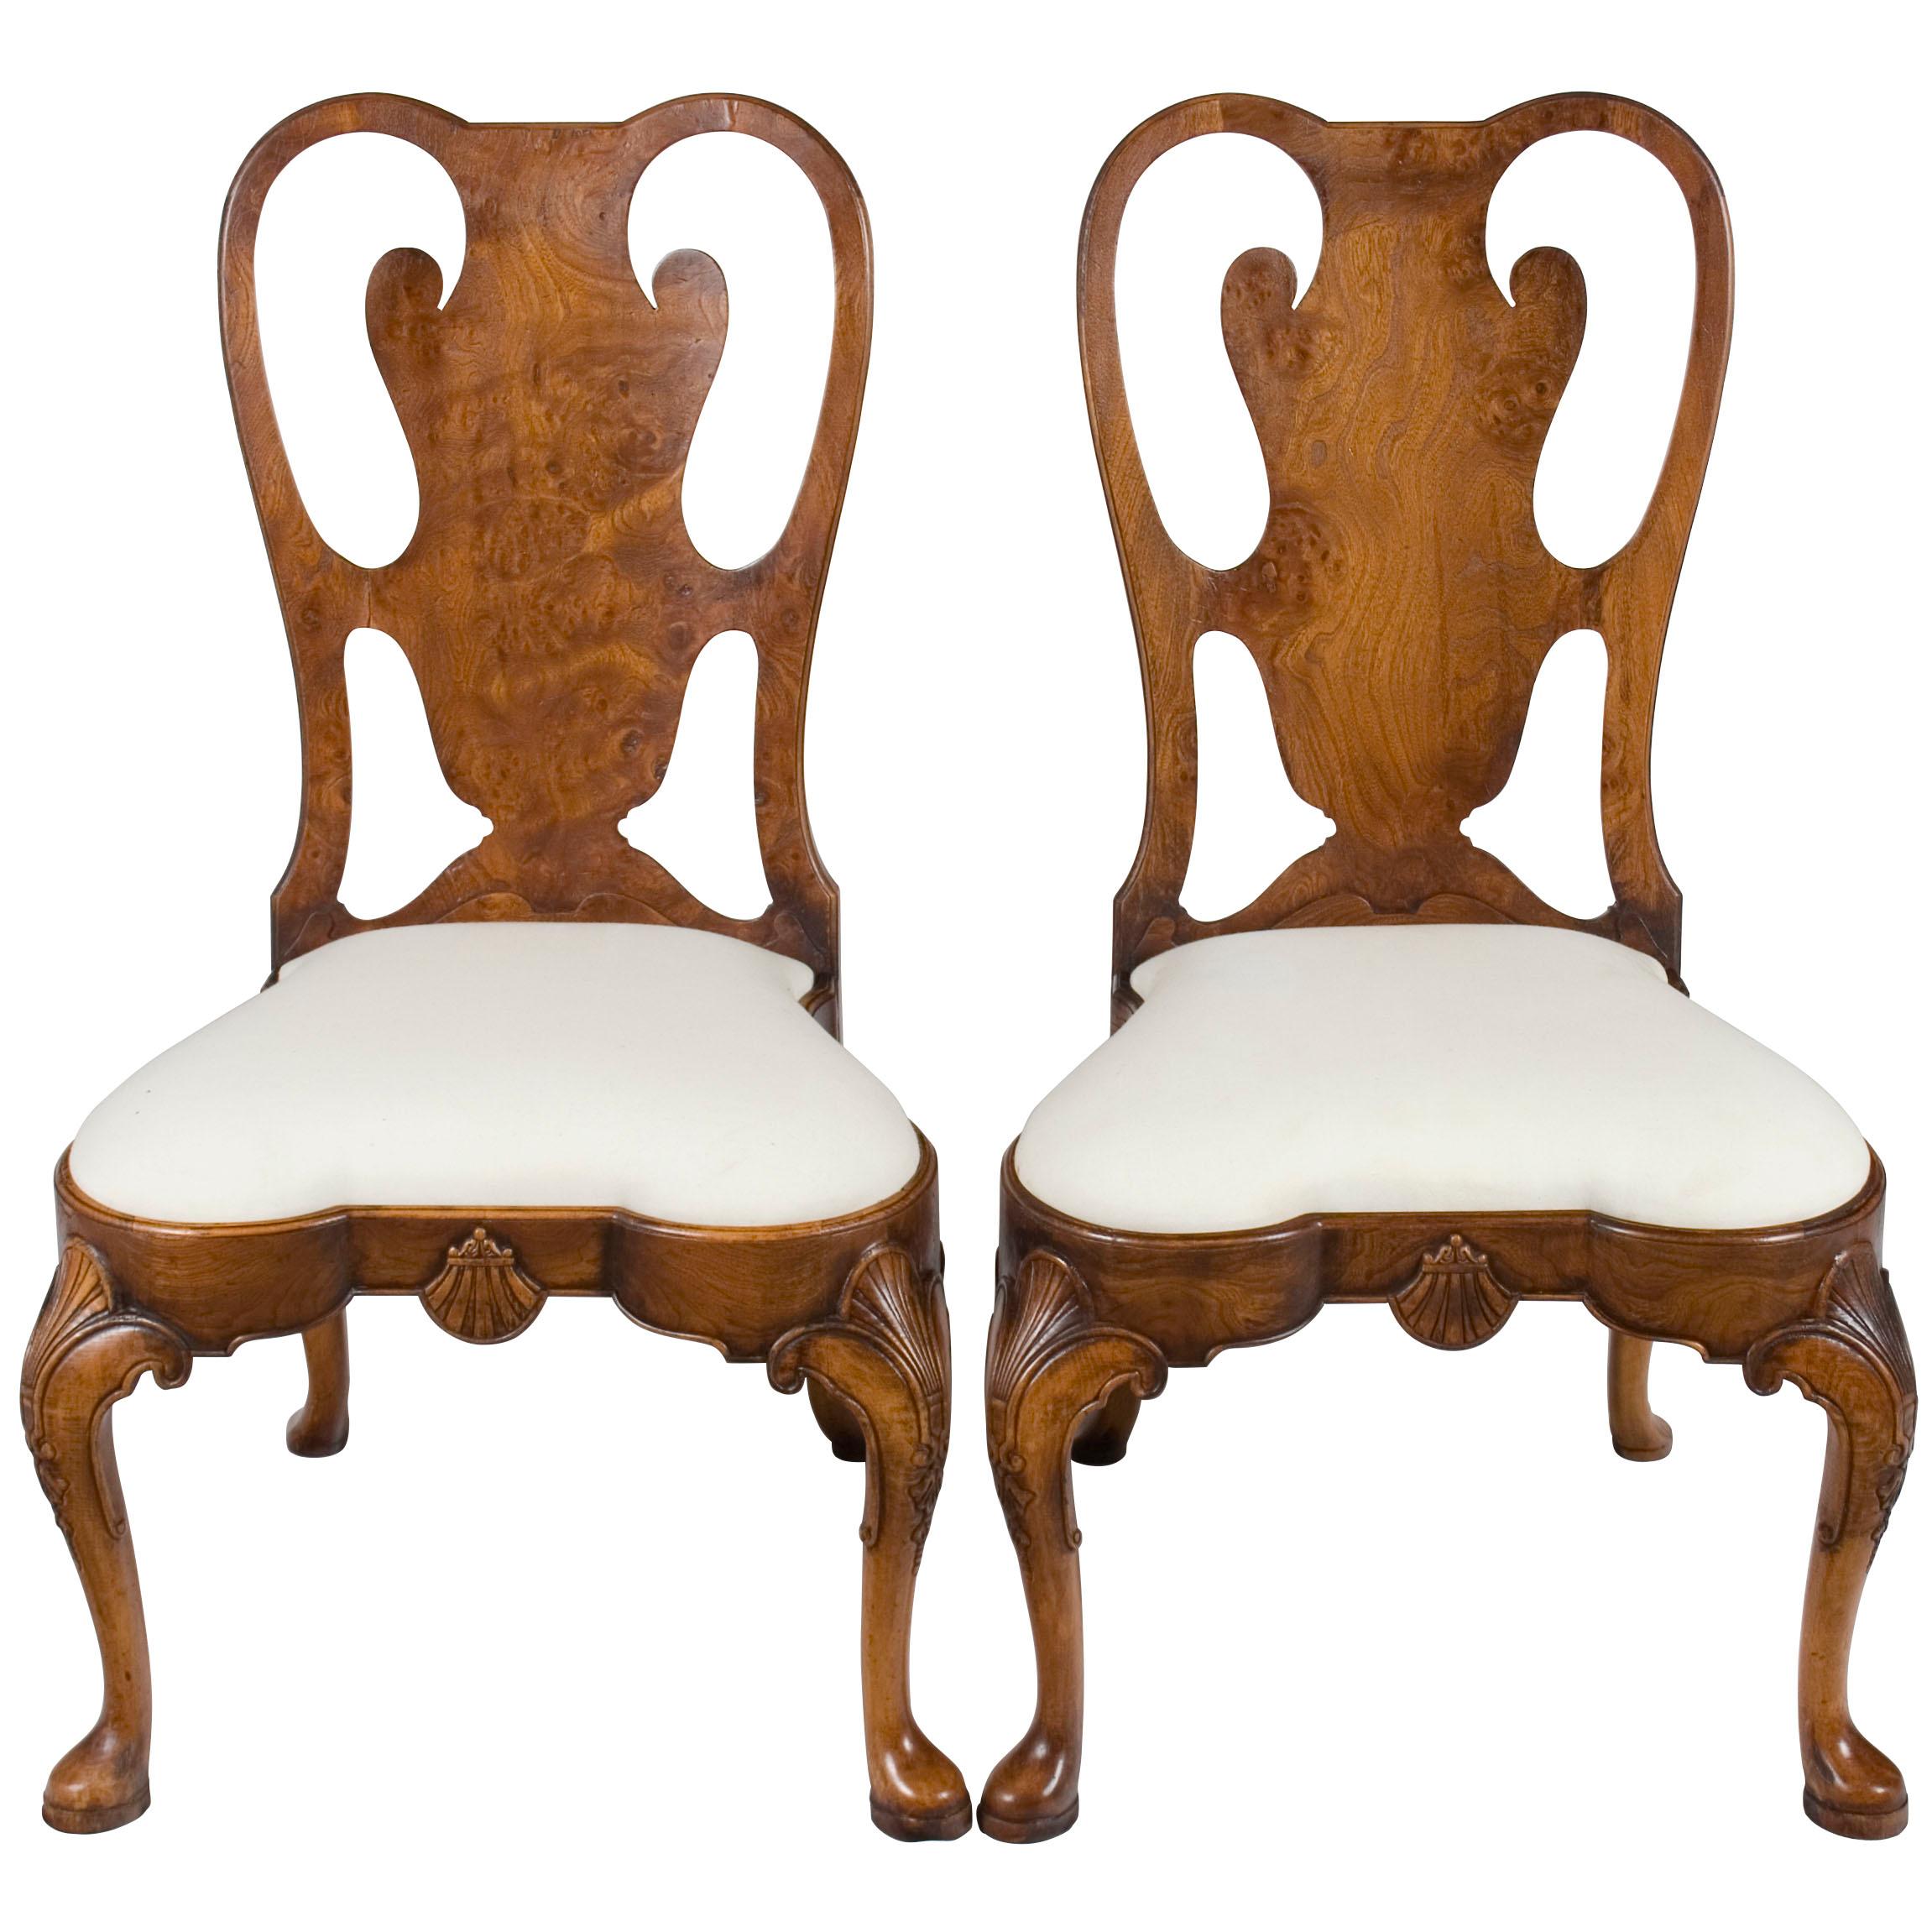 Pair of Carved Burl Walnut Queen Anne Style Dining Room Chairs For Sale